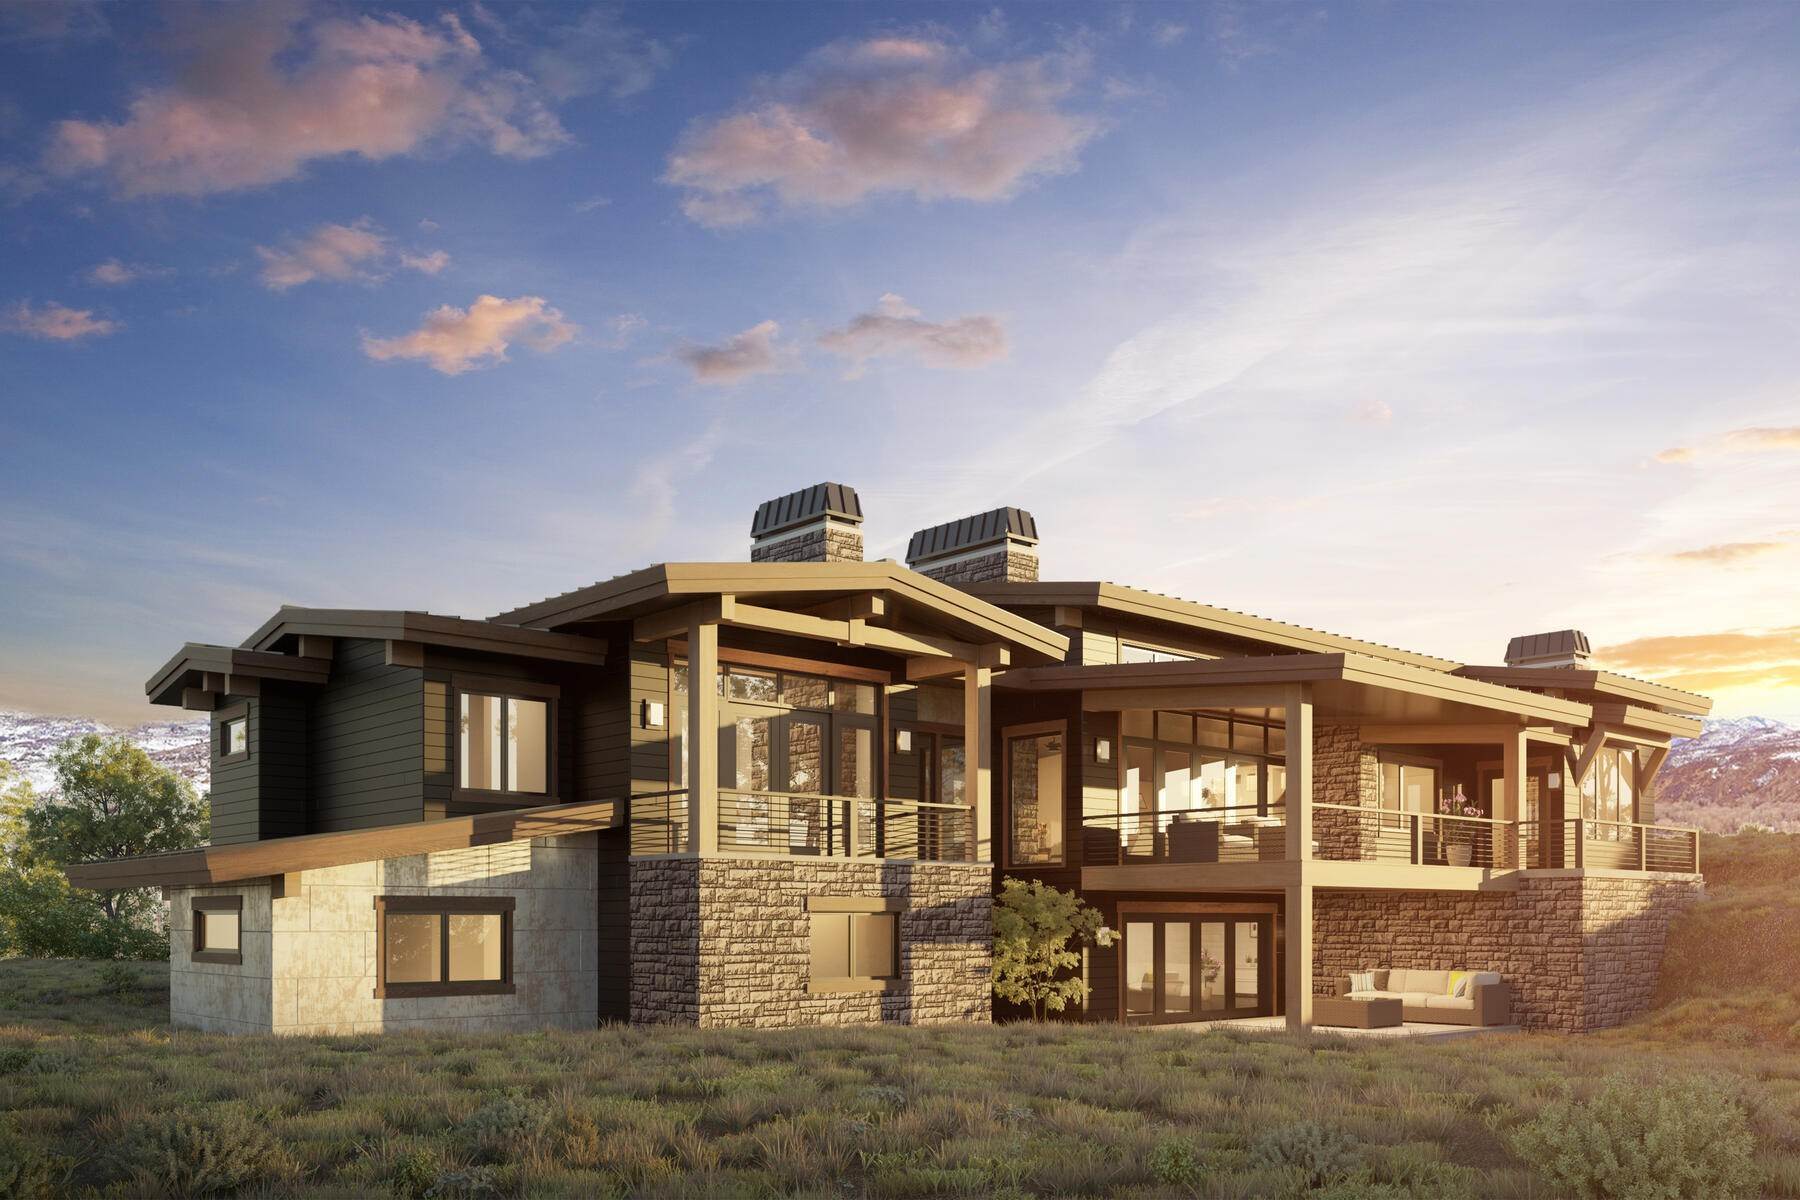 Property for Sale at Outdoor adventure is at your doorstep with this new construction home! 5925 E Caddis Circle Heber City, Utah 84032 United States